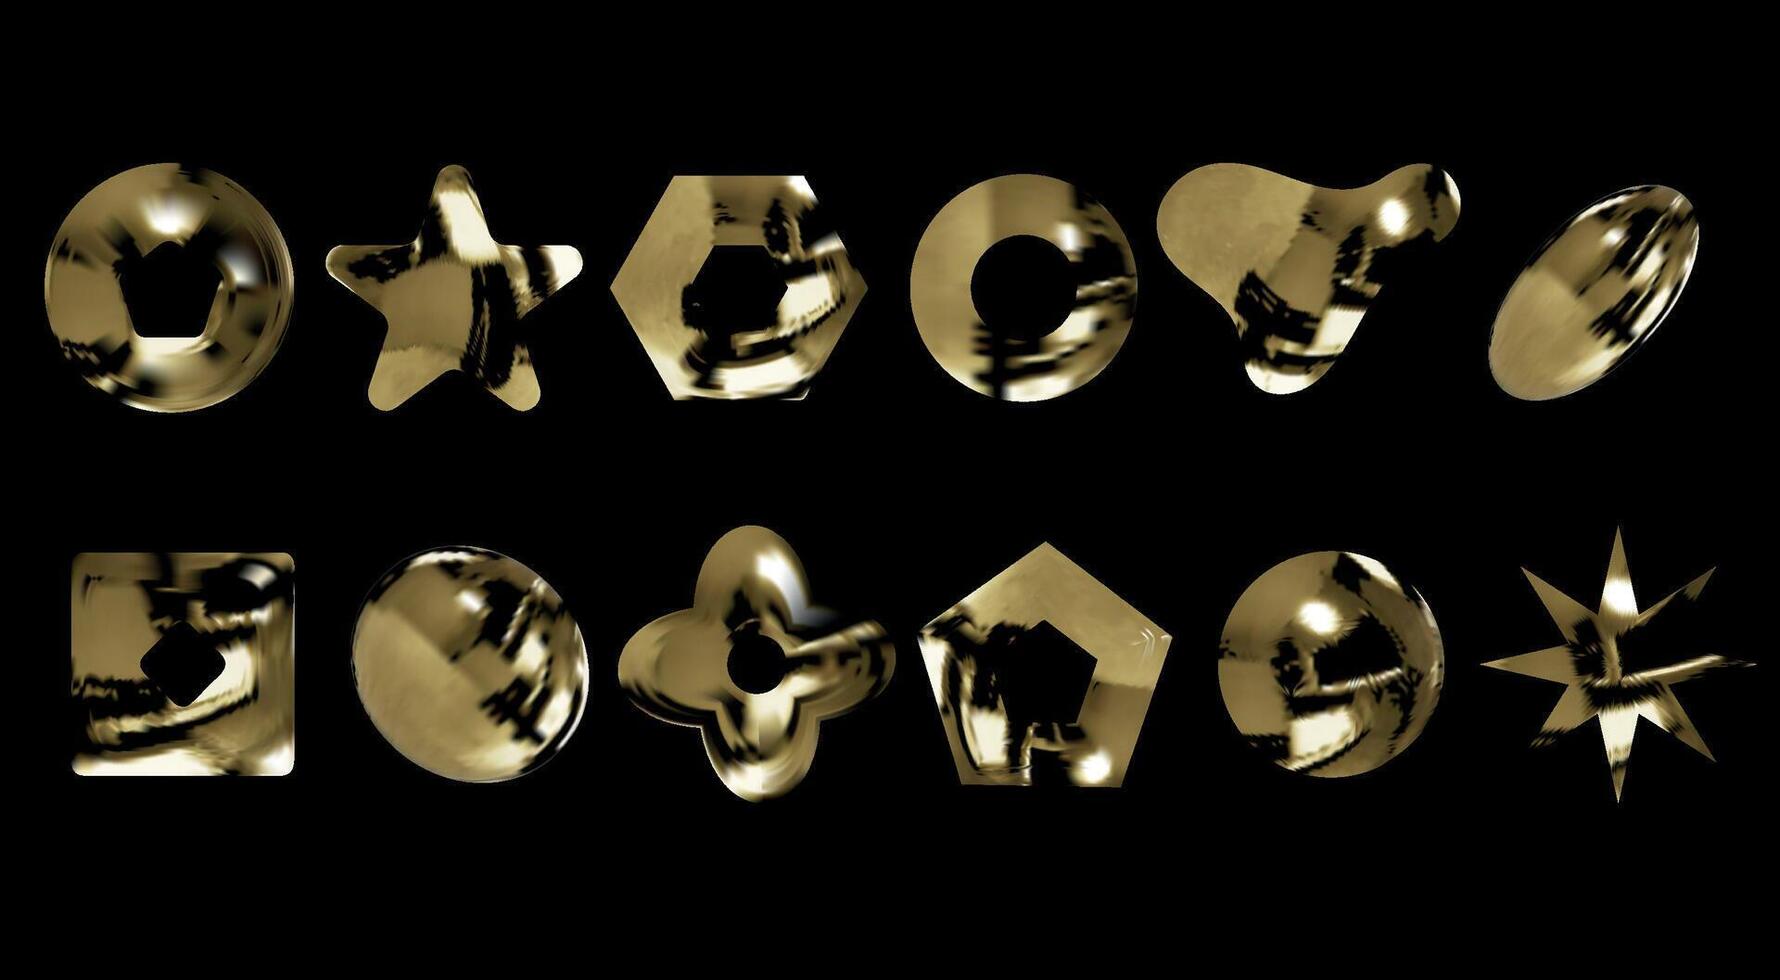 Gold metal reflective elements for design, set on a black background. Retro simple geometric shapes with metallic effect. abstract figures with a shiny reflective surface vector